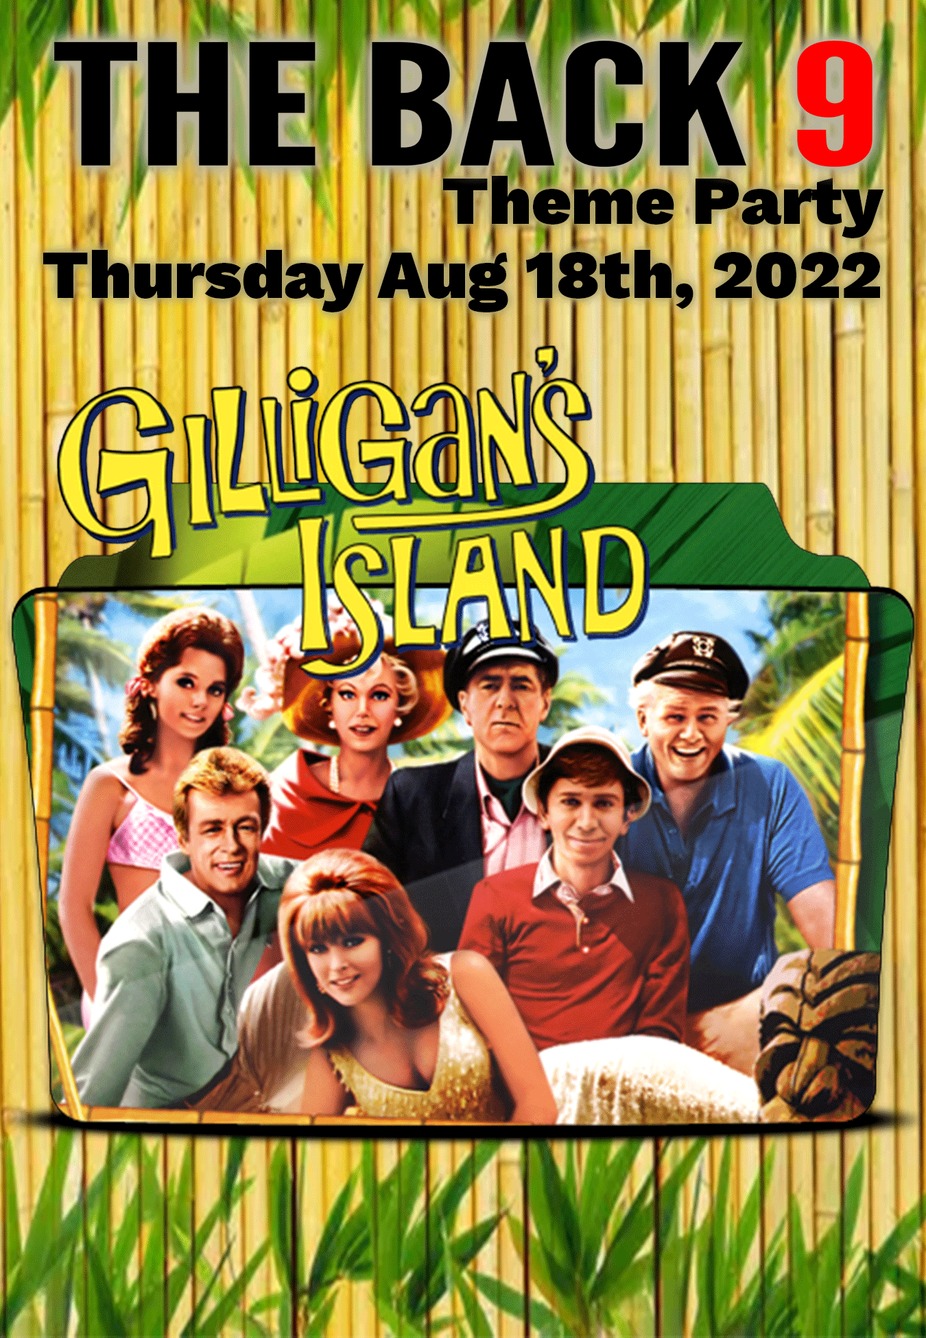 Gilligan's Island  Themed Party event photo